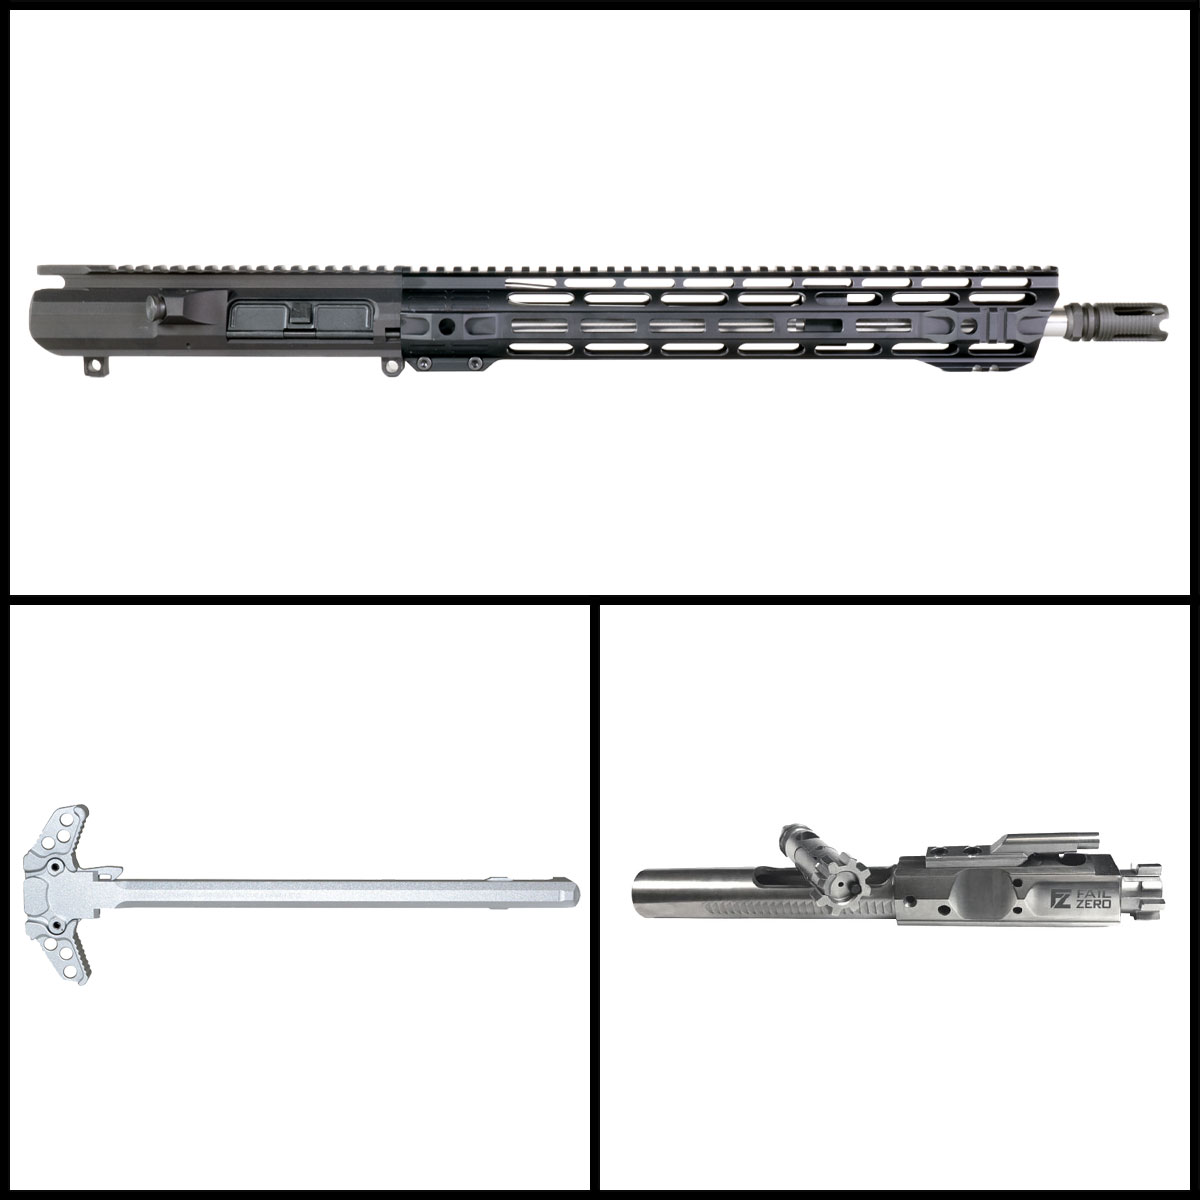 Davidson Defense 'Ironclad' 16-inch LR-308 .308 Win Stainless Rifle Complete Upper Build Kit